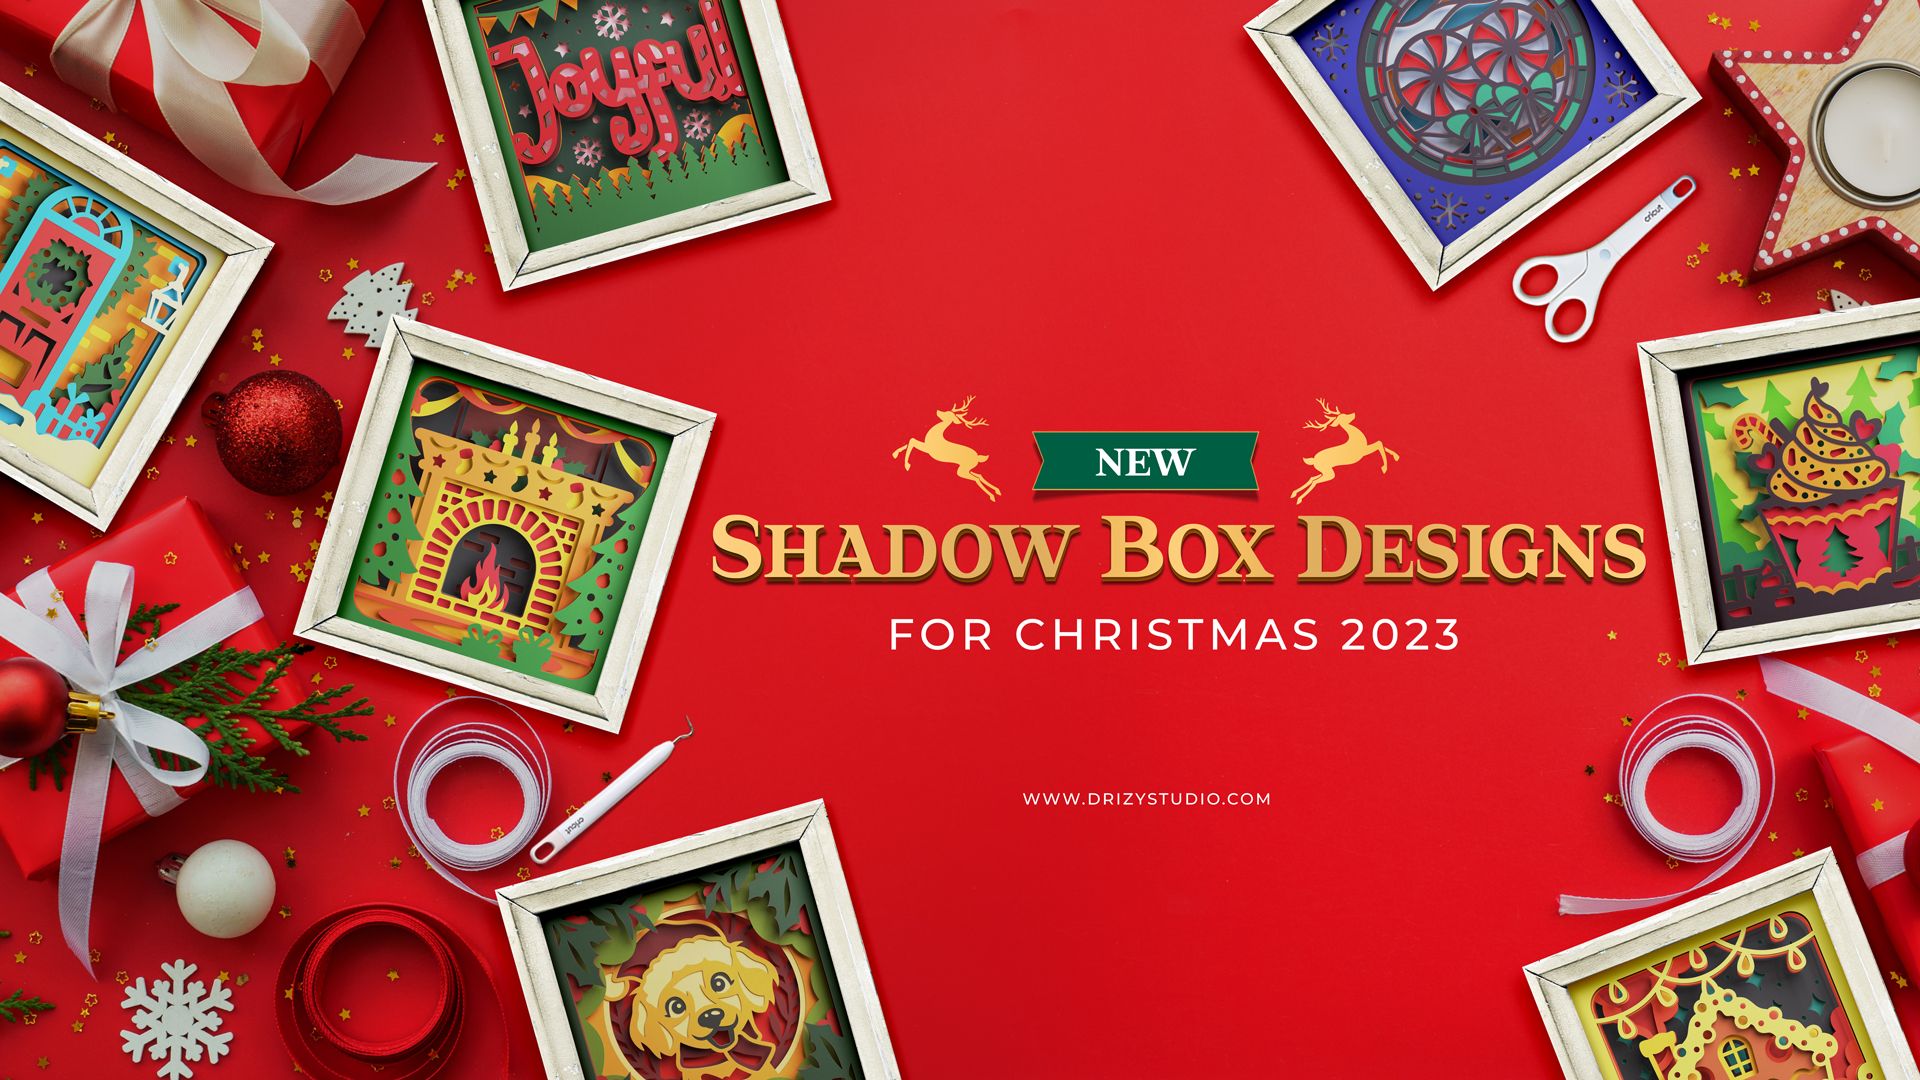 2023 Christmas Shadow Box to End the Year With a Bang!